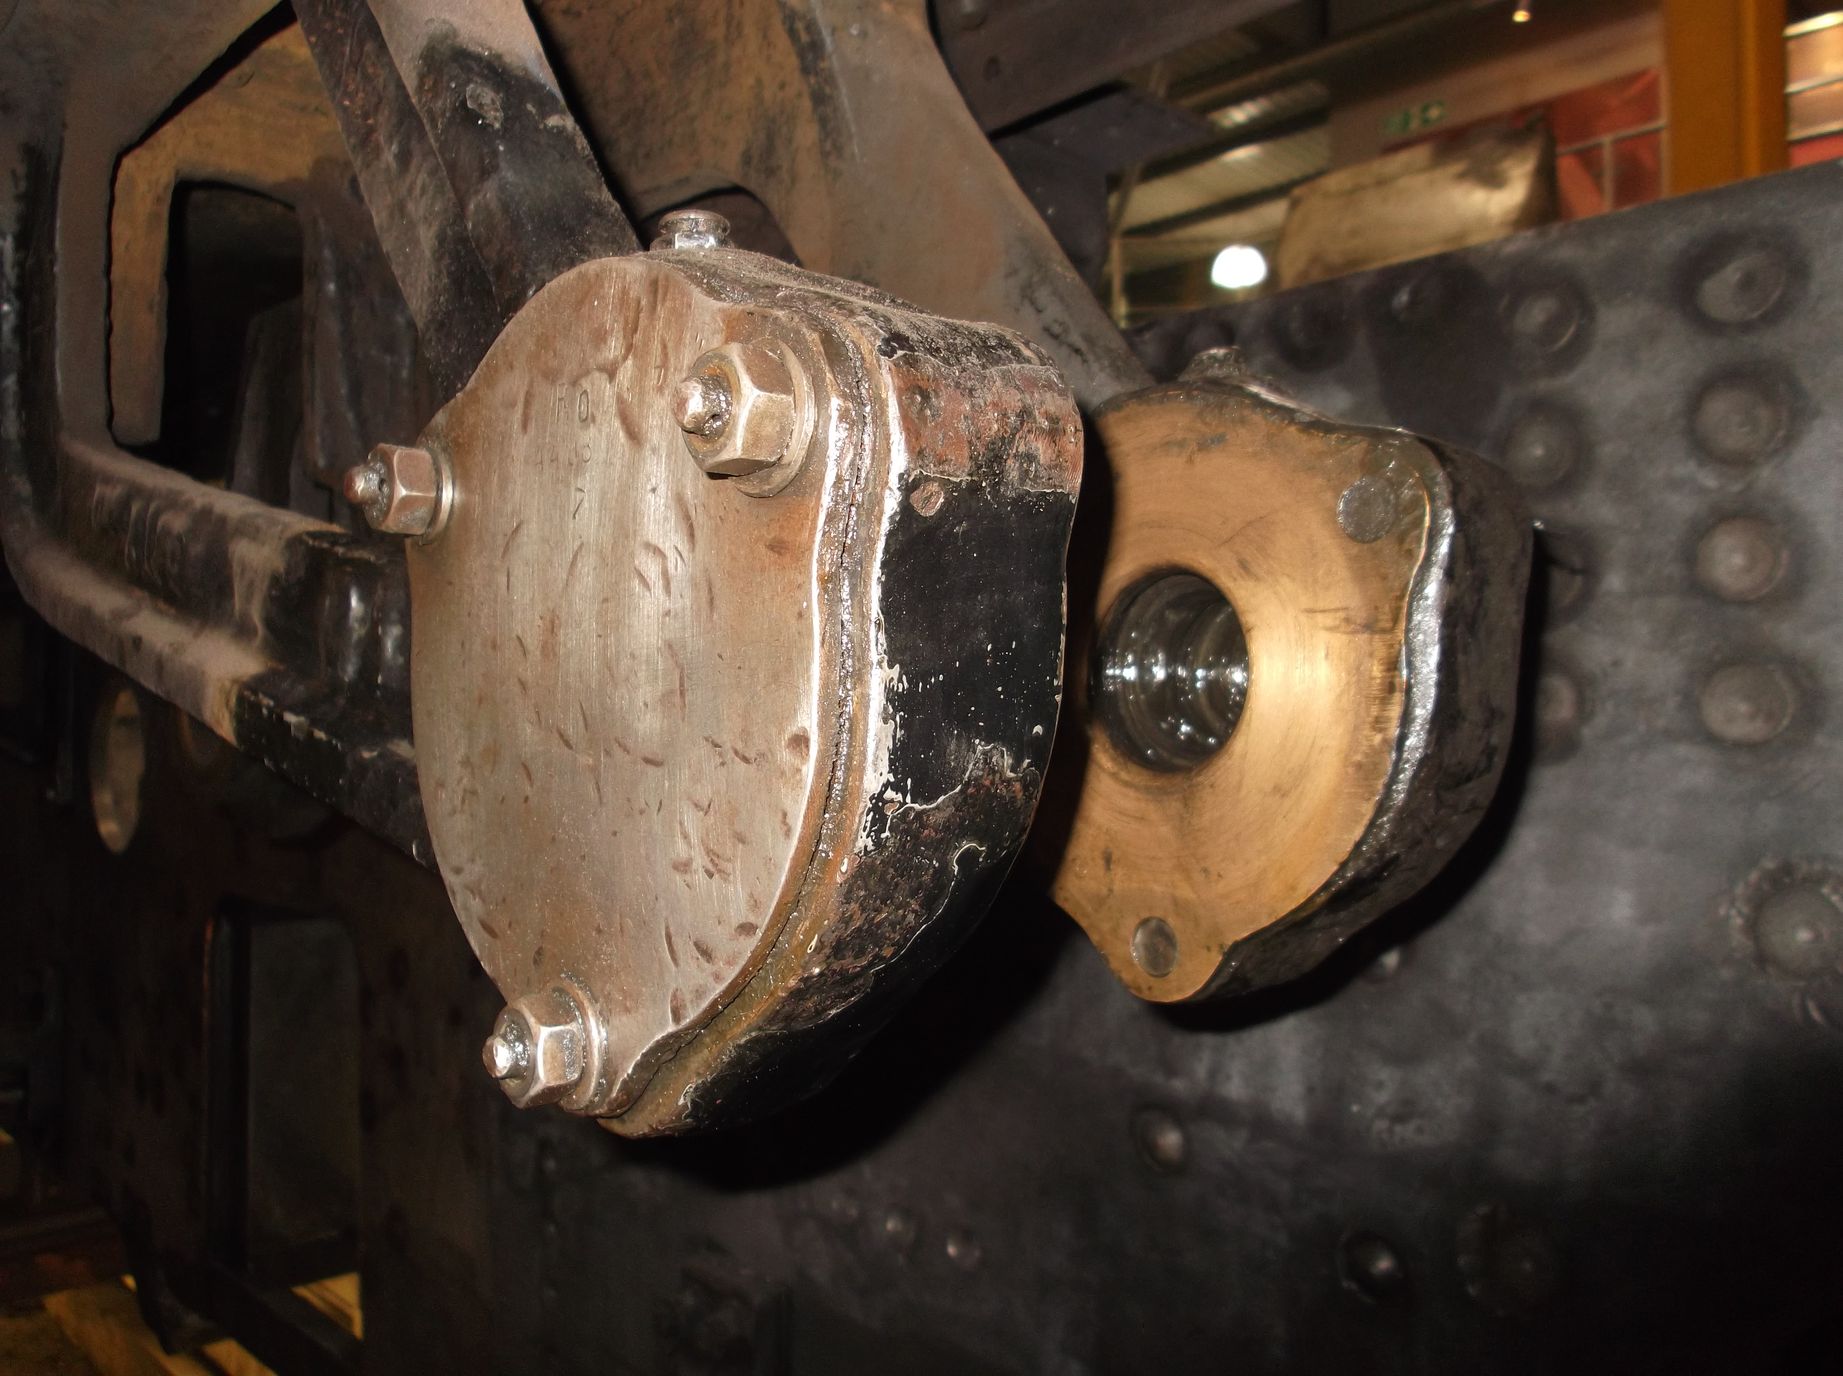 The expansion link trunnion bearing before removal